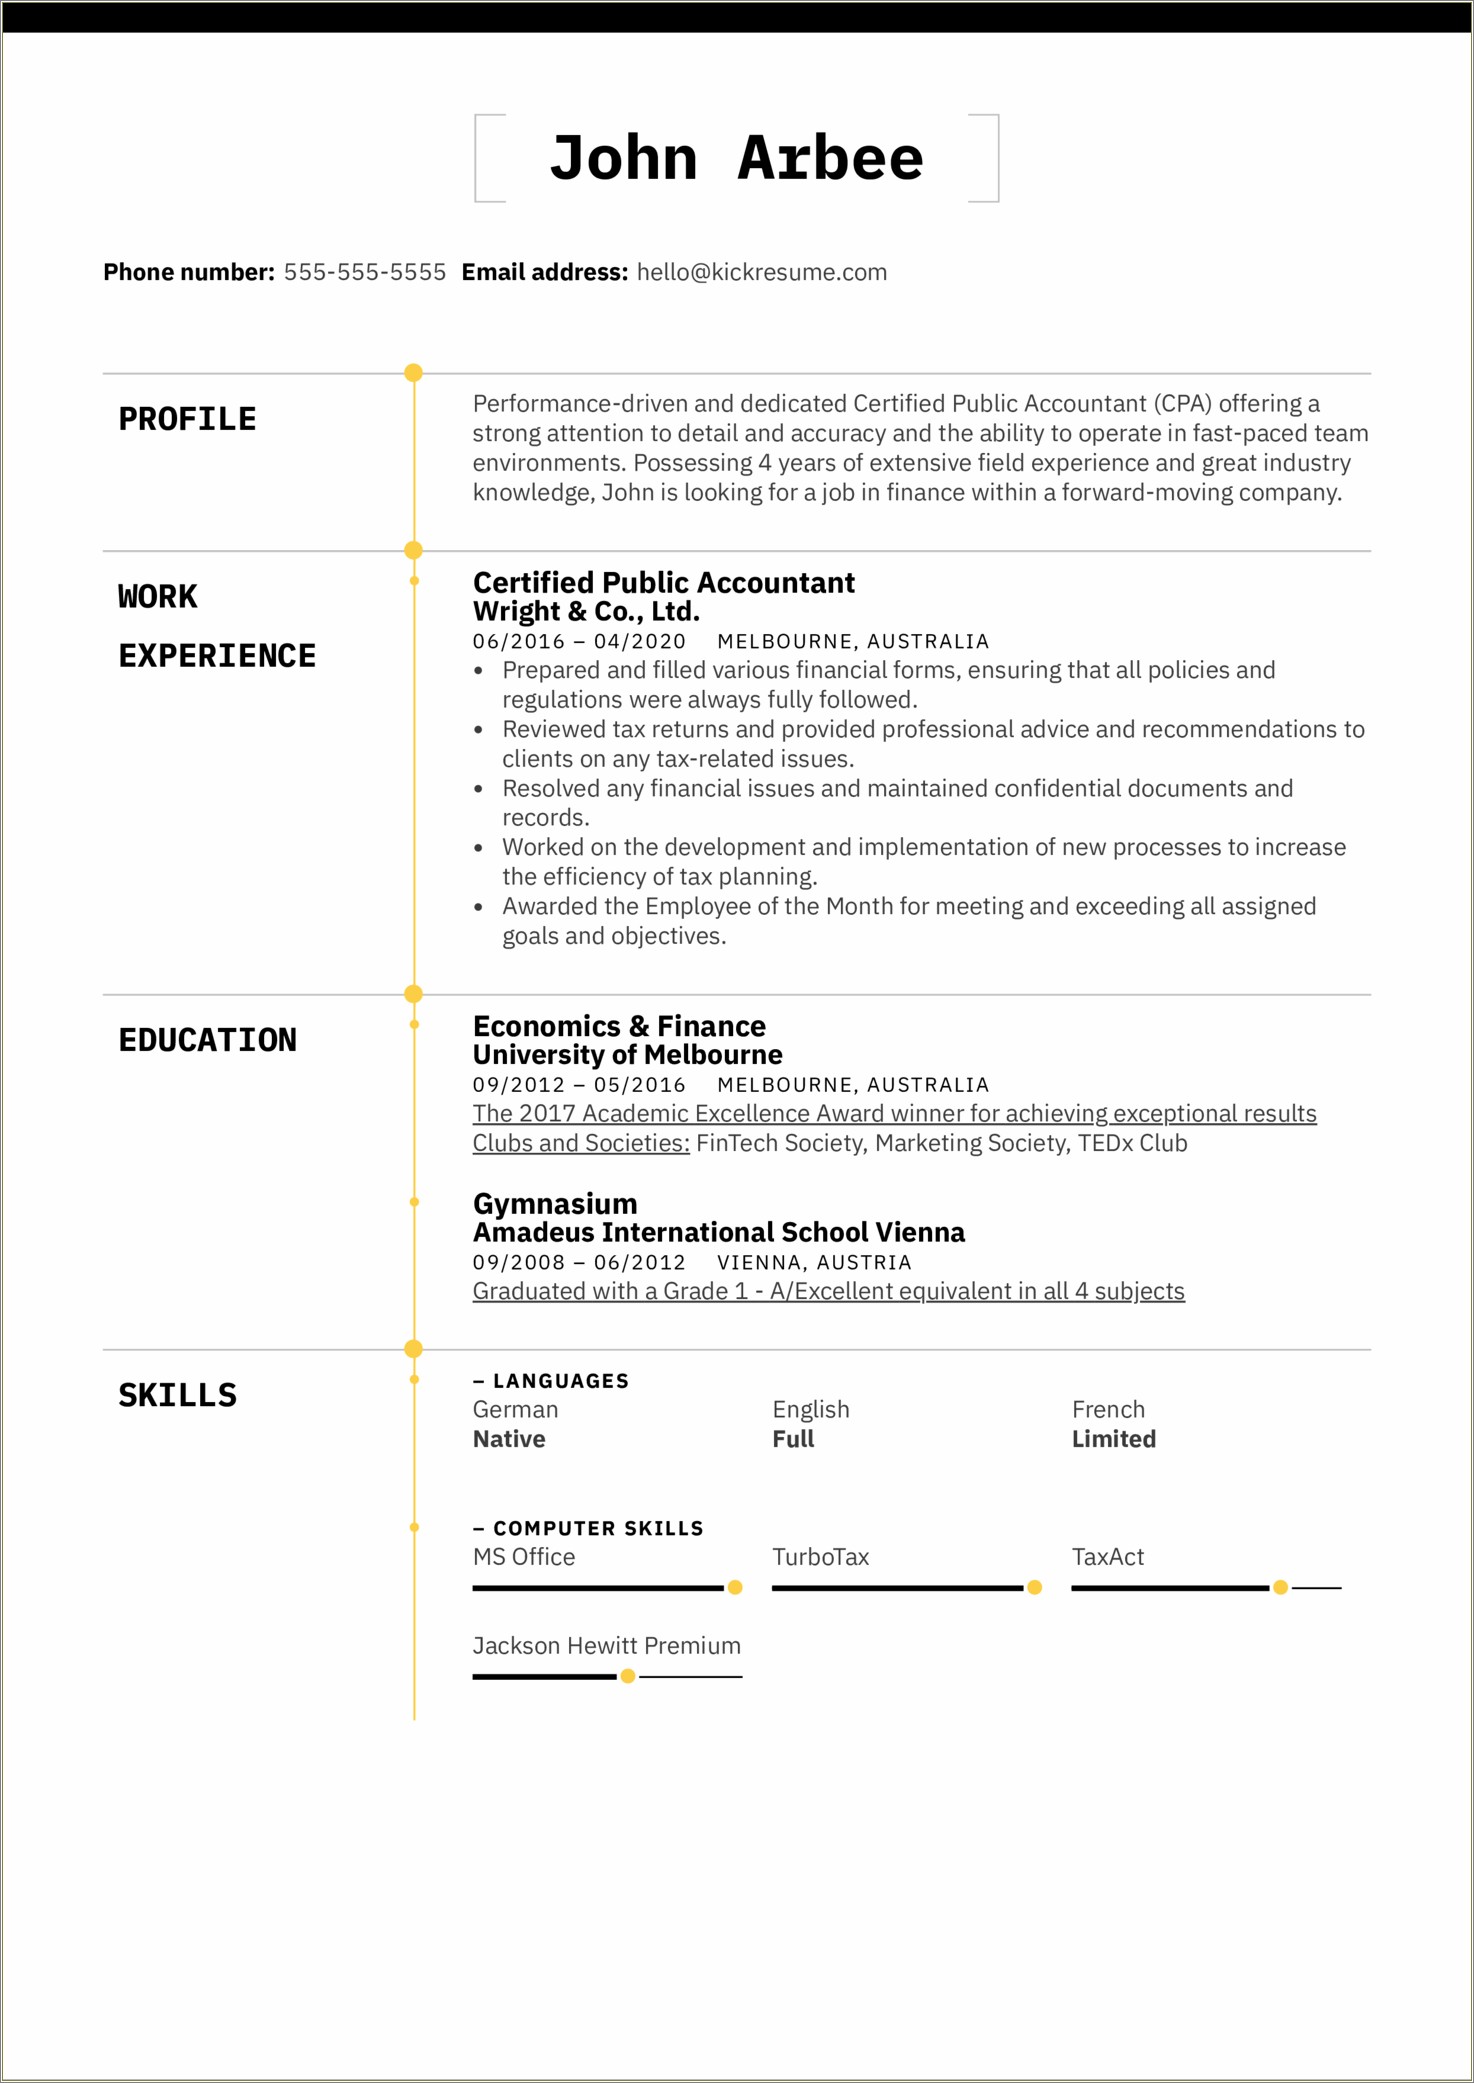 Resume Sample With Cpa In Process